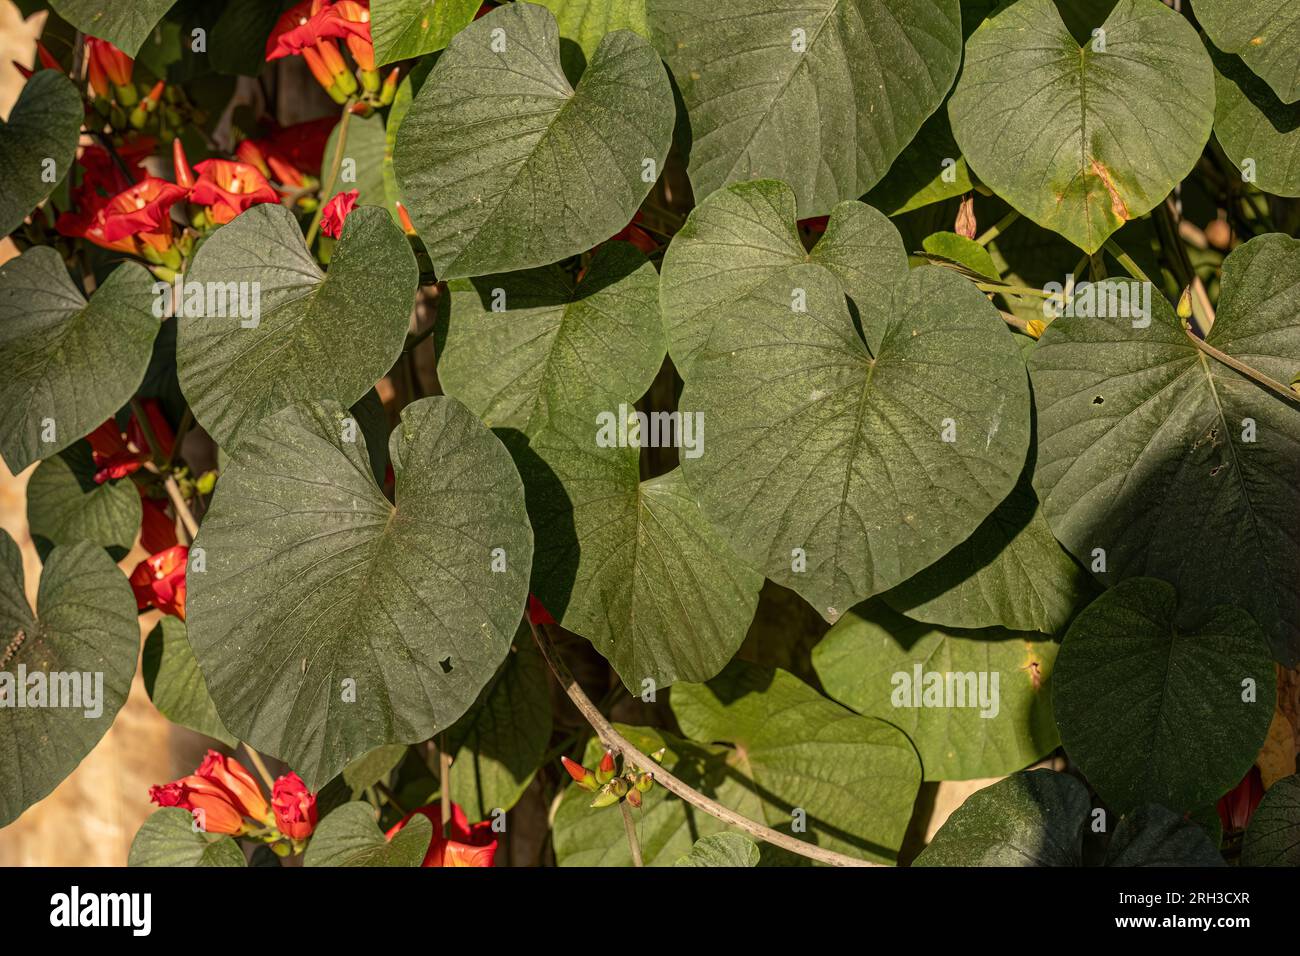 Flowering Angiosperm Plant of the species Stictocardia macalusoi Stock Photo